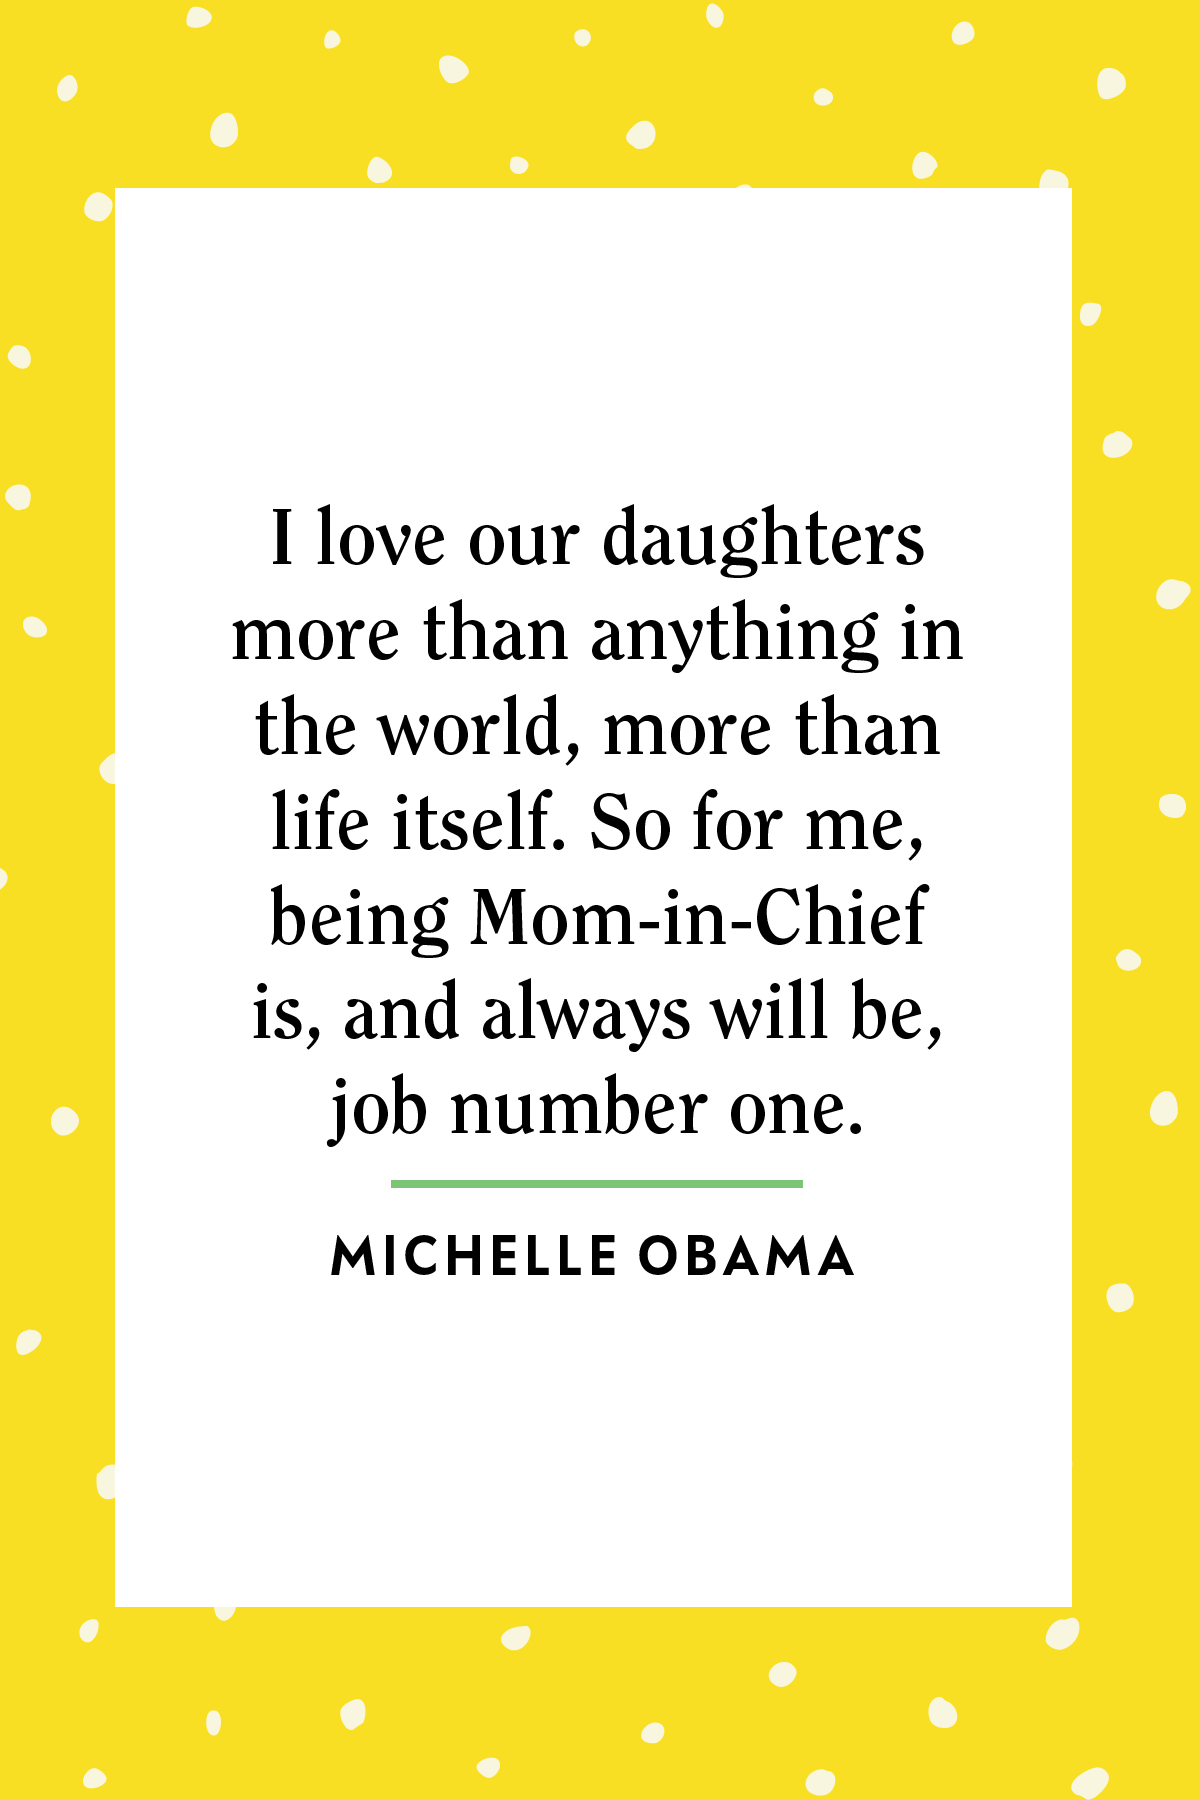 59 Touching Mother Daughter Quotes To Express Your Love